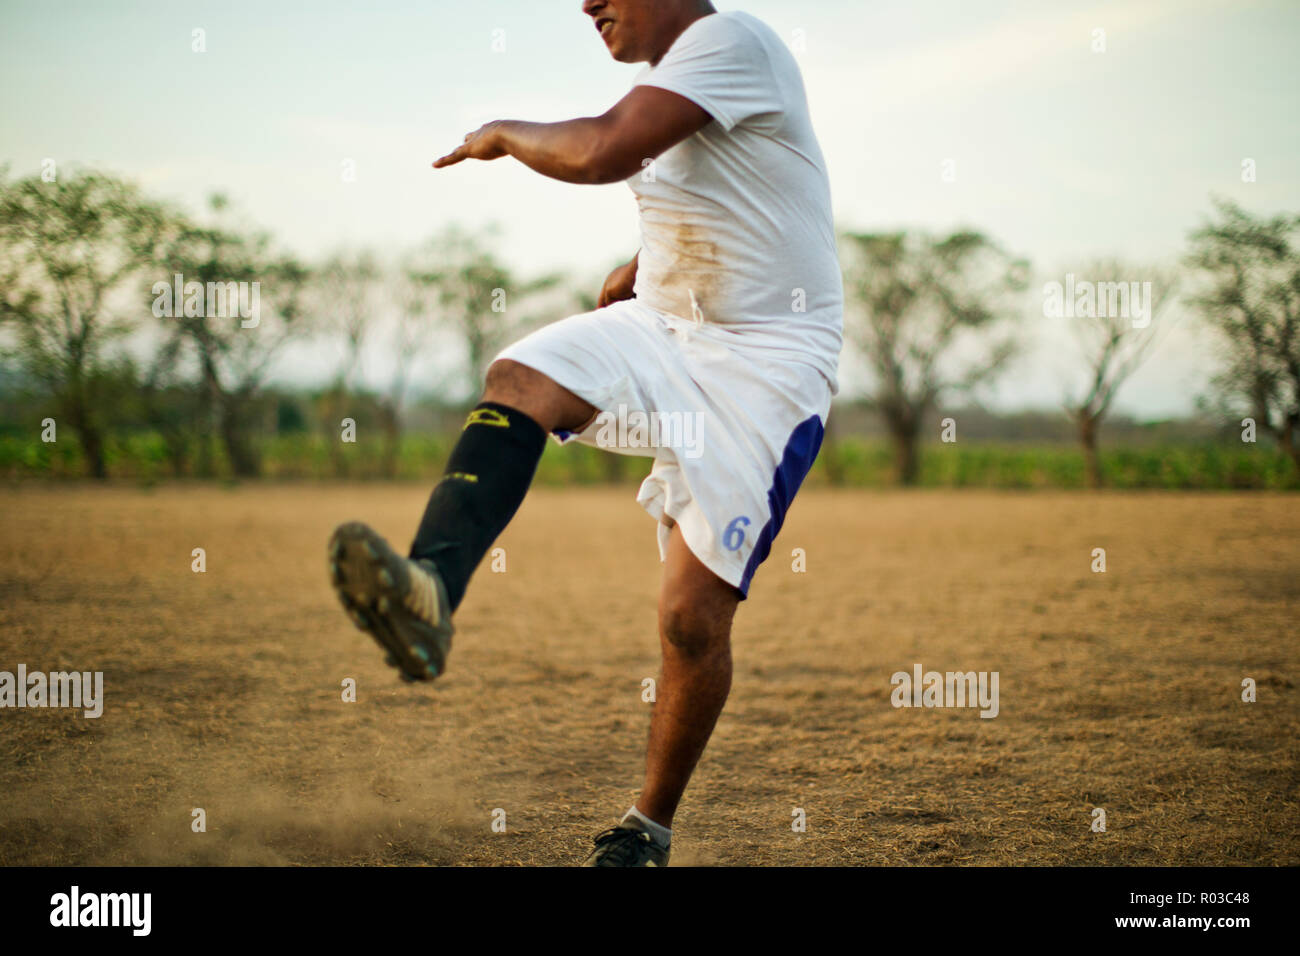 Young soccer player kicking his leg in the air while playing on a dusty soccer field. Stock Photo